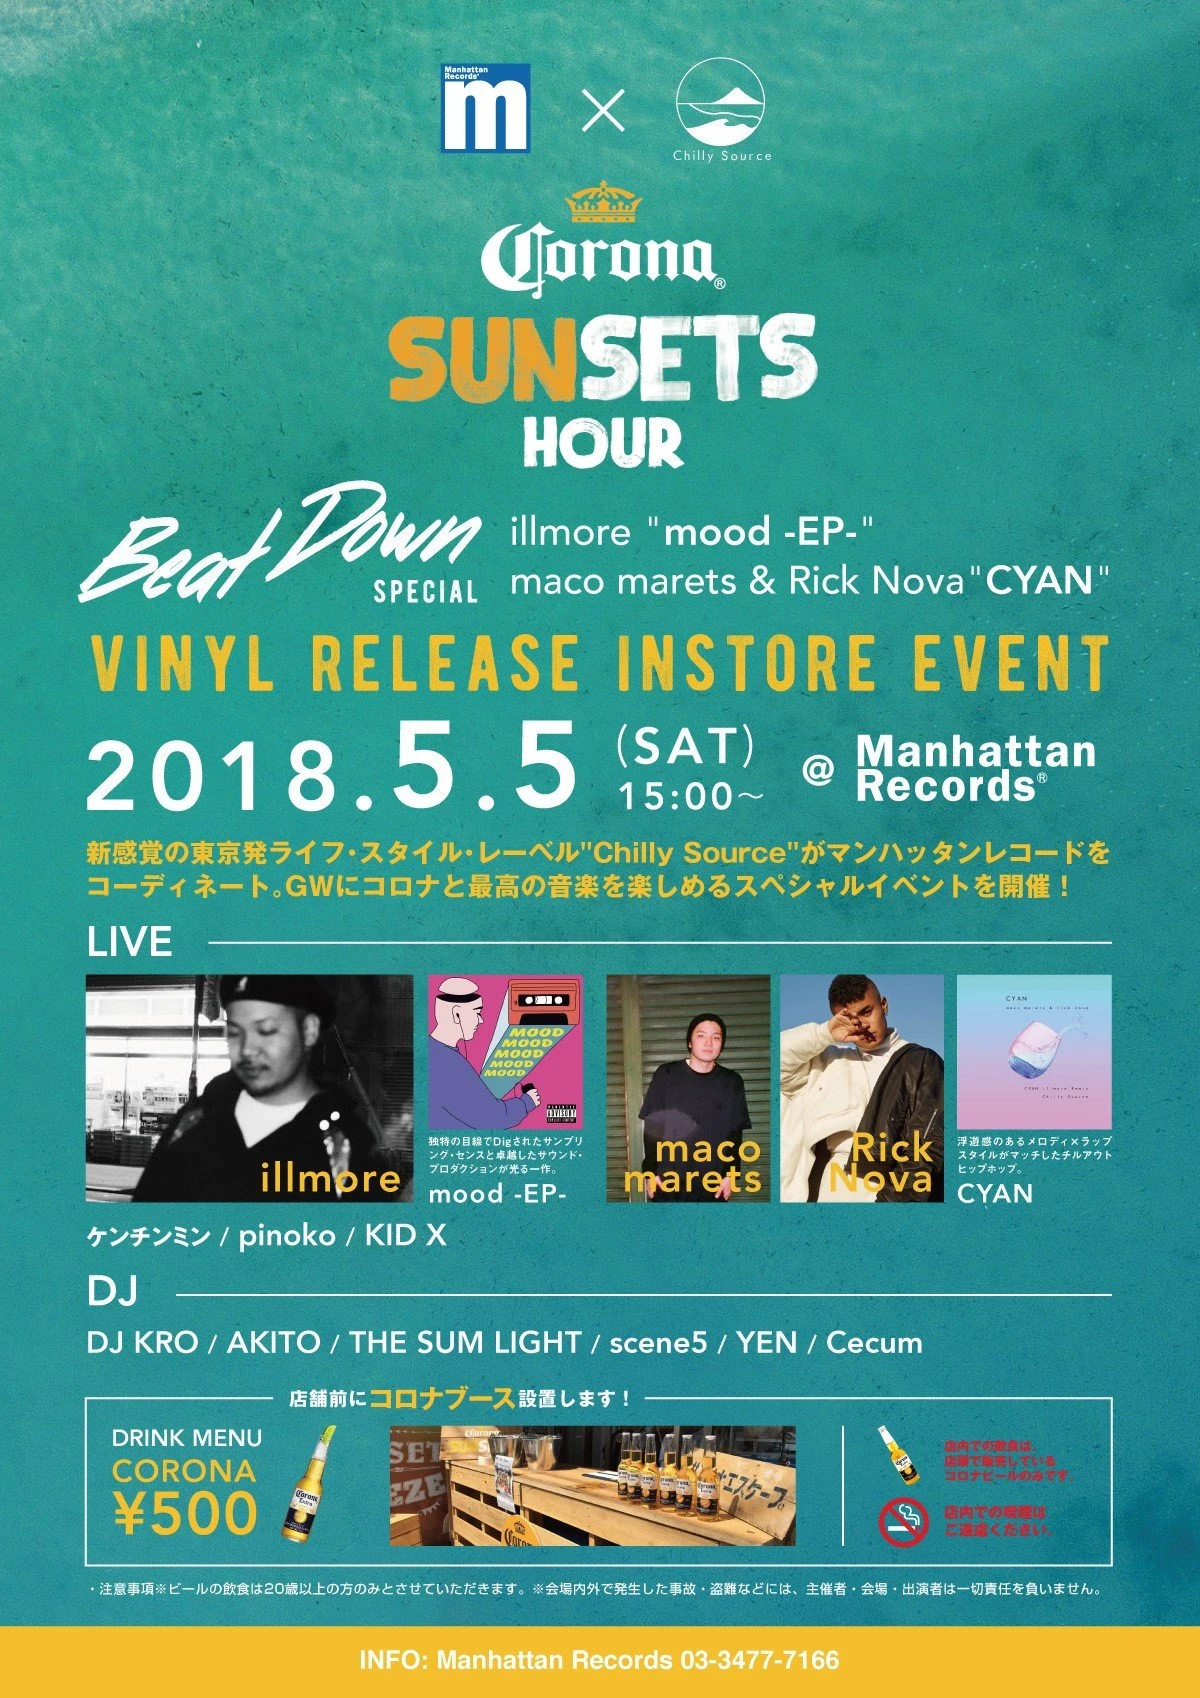 「CORONA SUNSETS HOUR」Beat Down SPECIAL